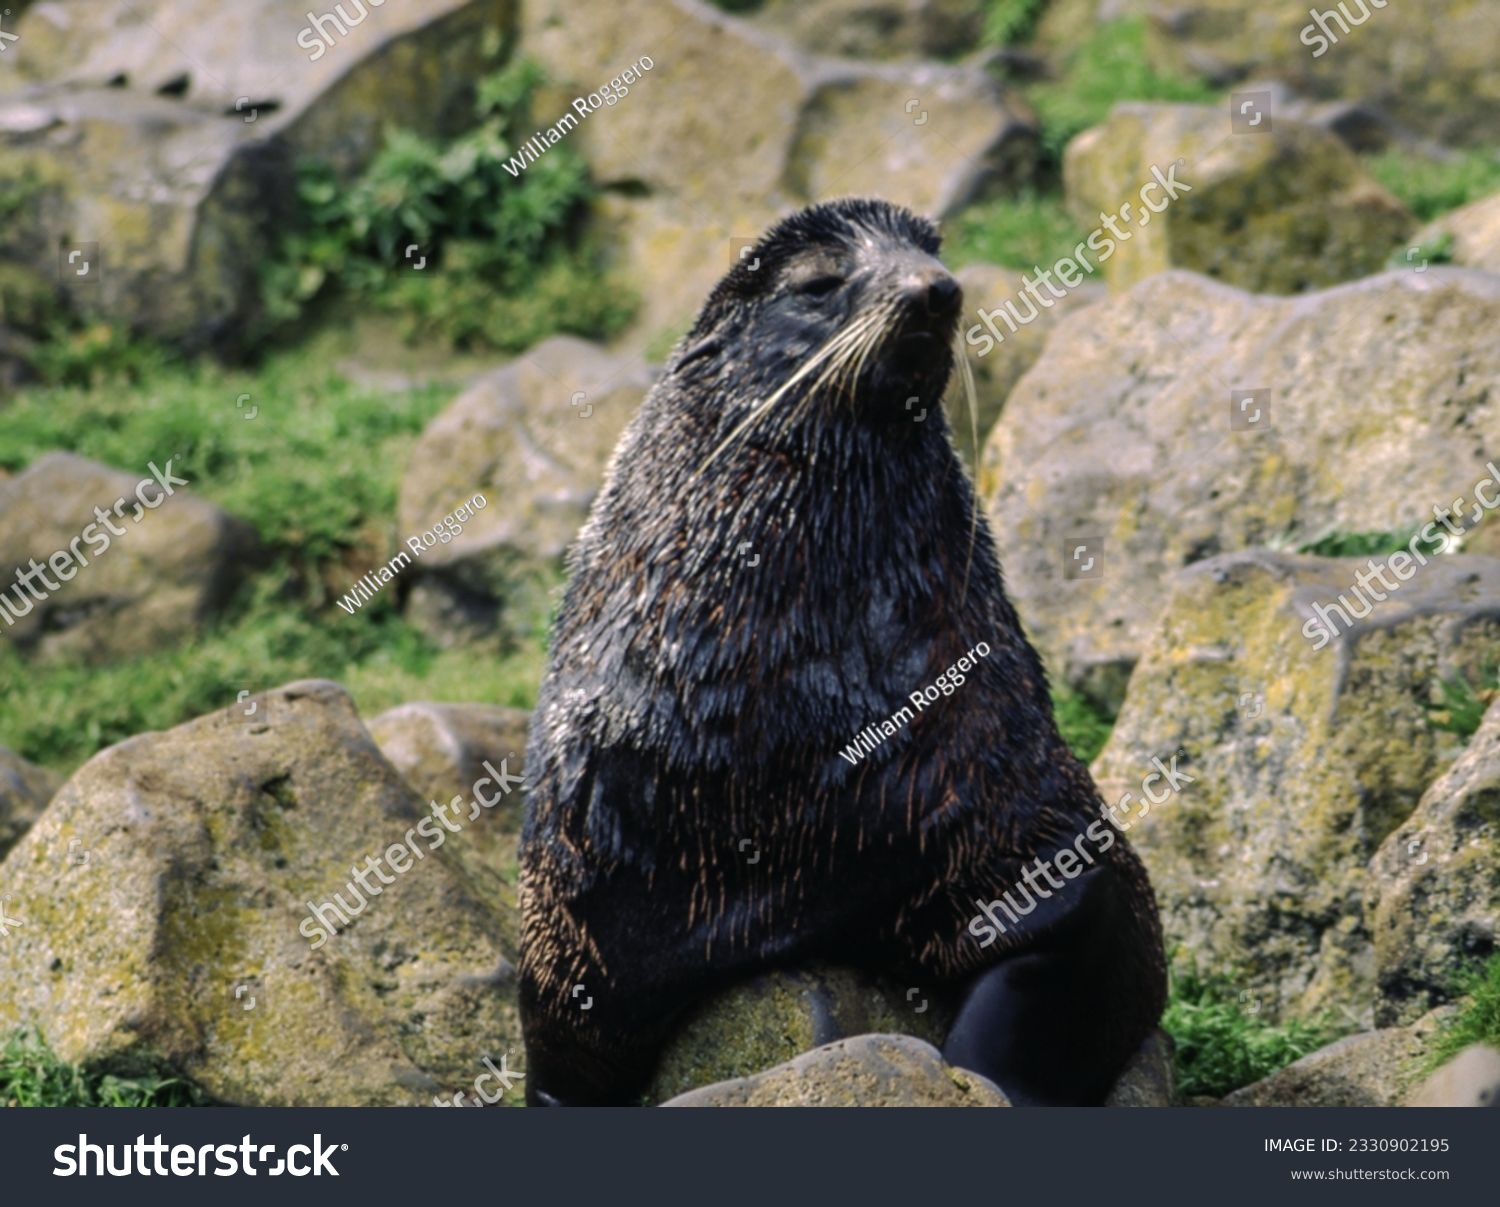 Northern fur seals have a stocky body, small head, very short snout, and extremely dense fur that ends at the wrist lines of their flippers. Their hind flippers can be up to one-fourth body length. #2330902195